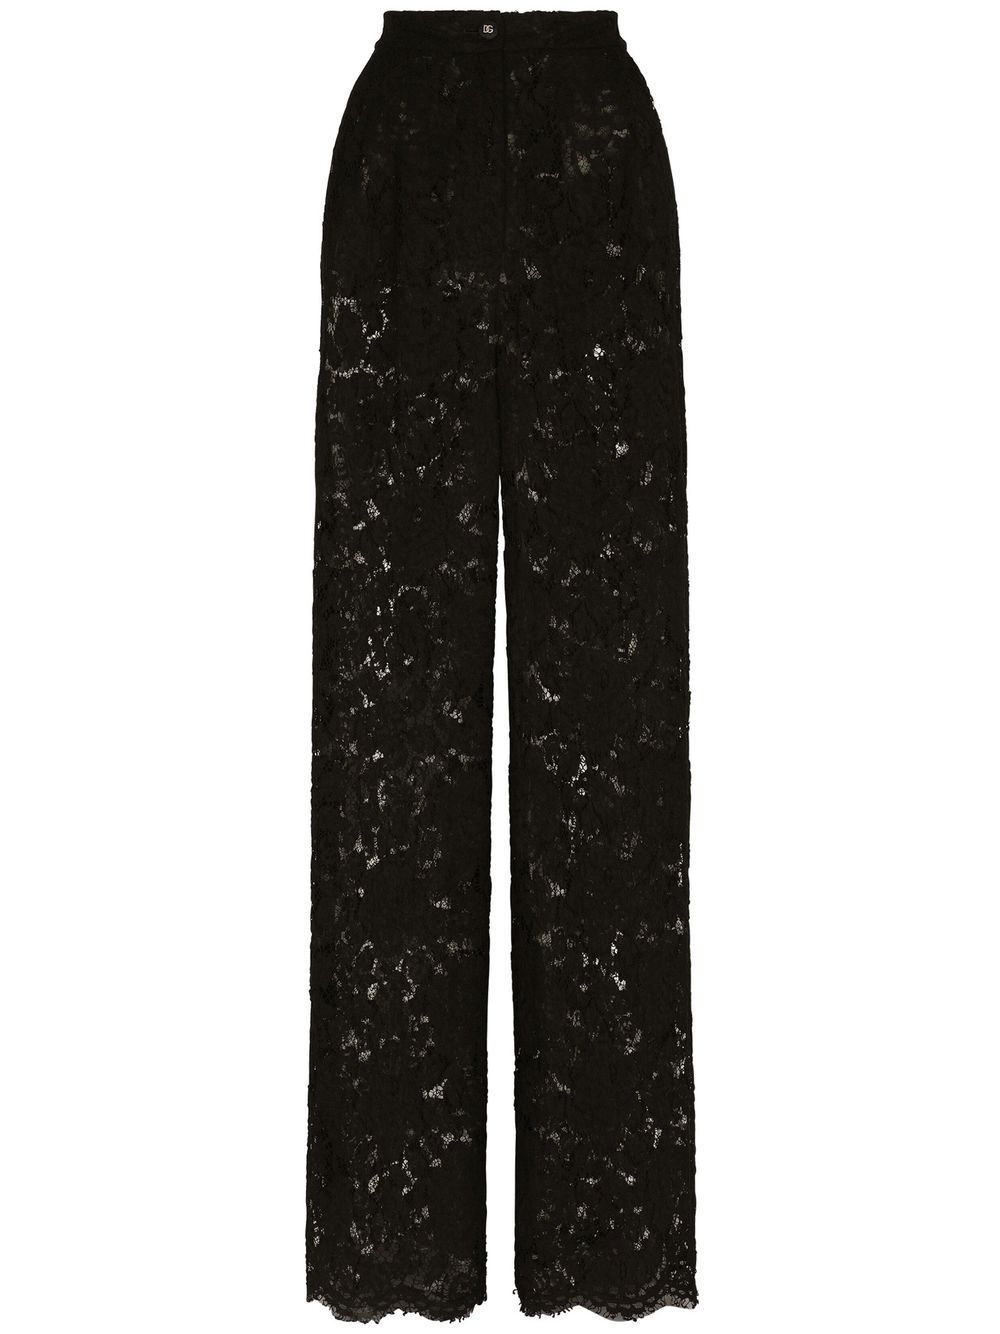 Dolce & Gabbana Floral Lace Tailored Trousers - Farfetch